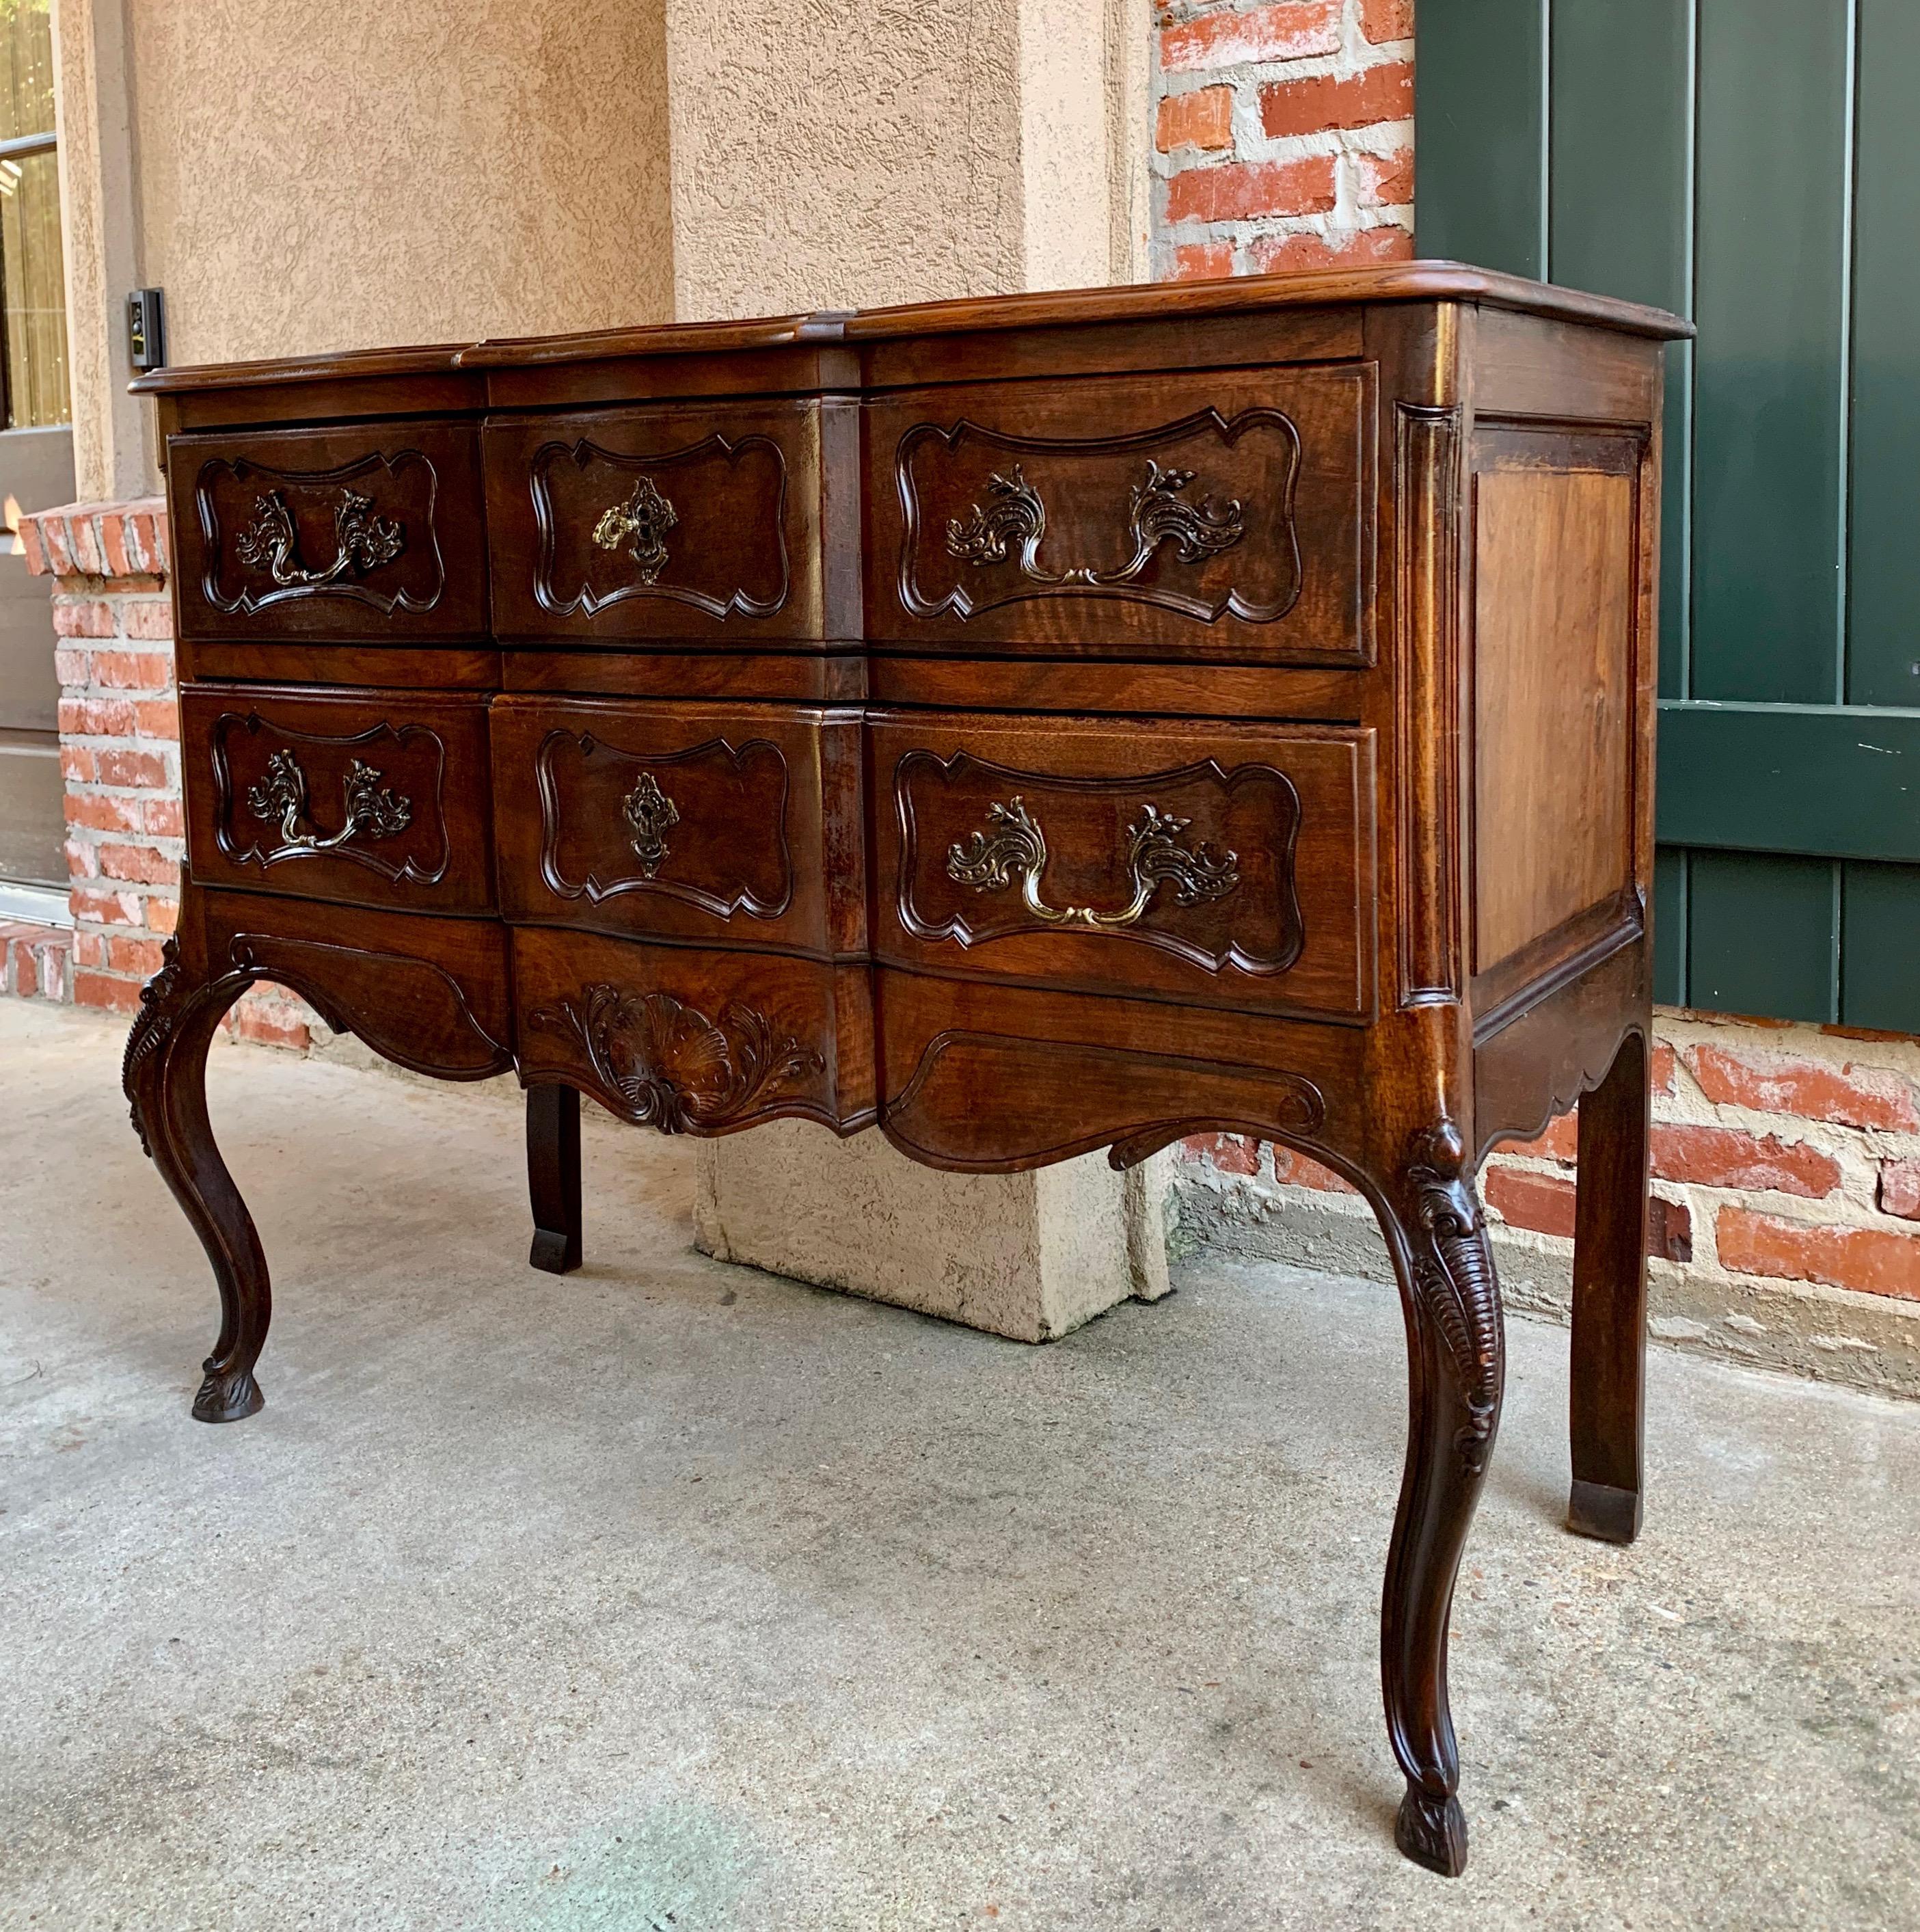 Direct from France, a substantial antique French carved walnut ‘commode’, or ‘chest of drawers’, this versatile piece is even suitable for a sideboard, with it’s great combination of size, style and construction!

~Two large drawers feature